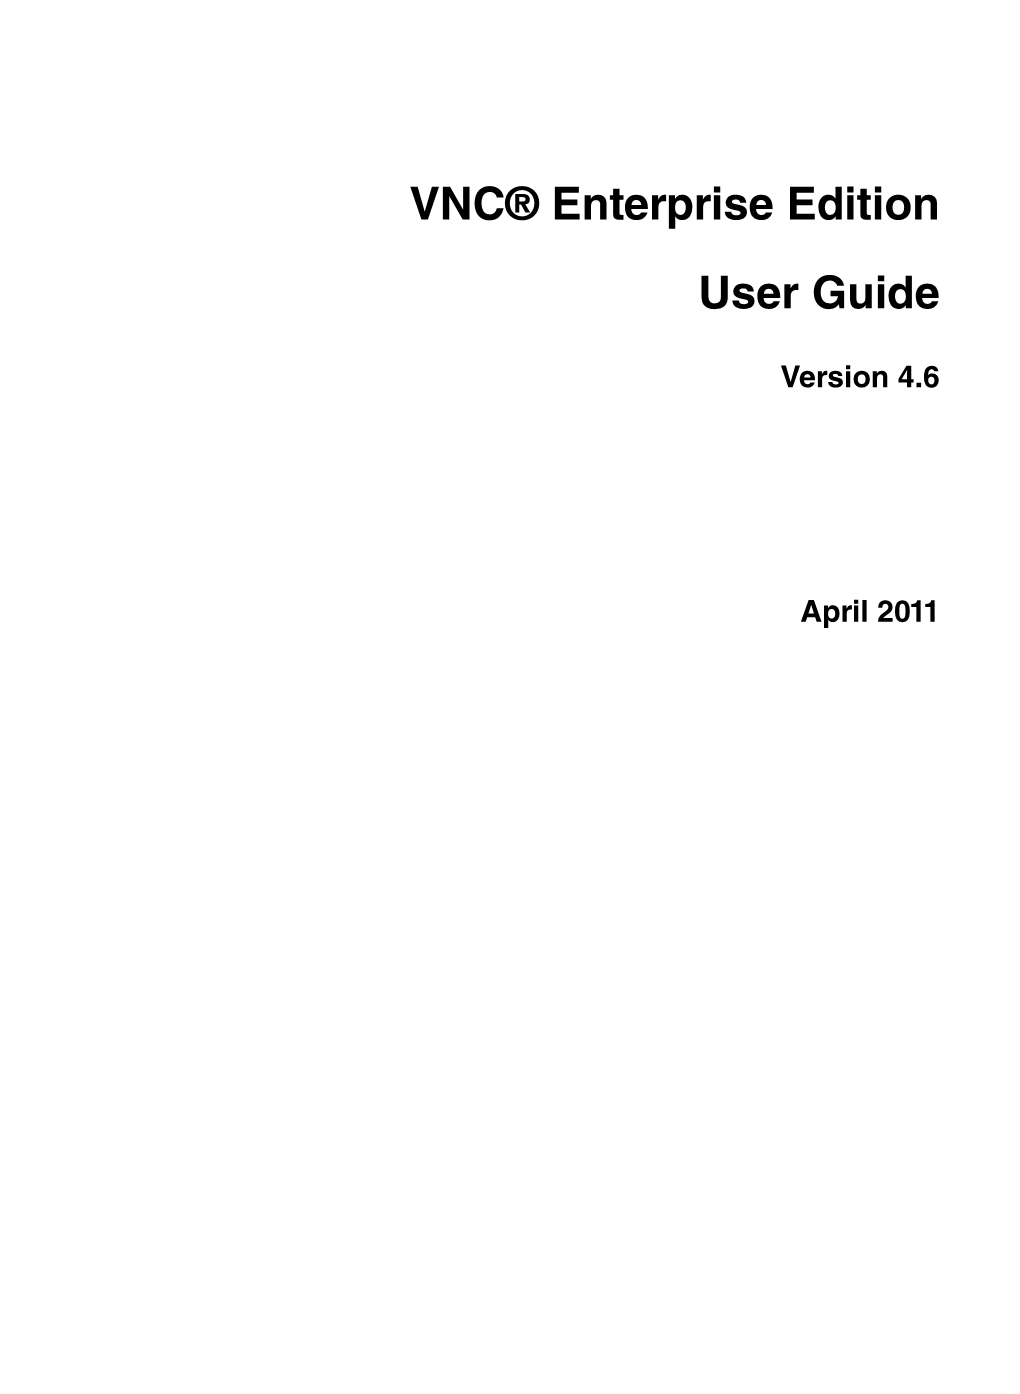 VNC Enterprise Edition 4.6 User Guide 7 About This Guide